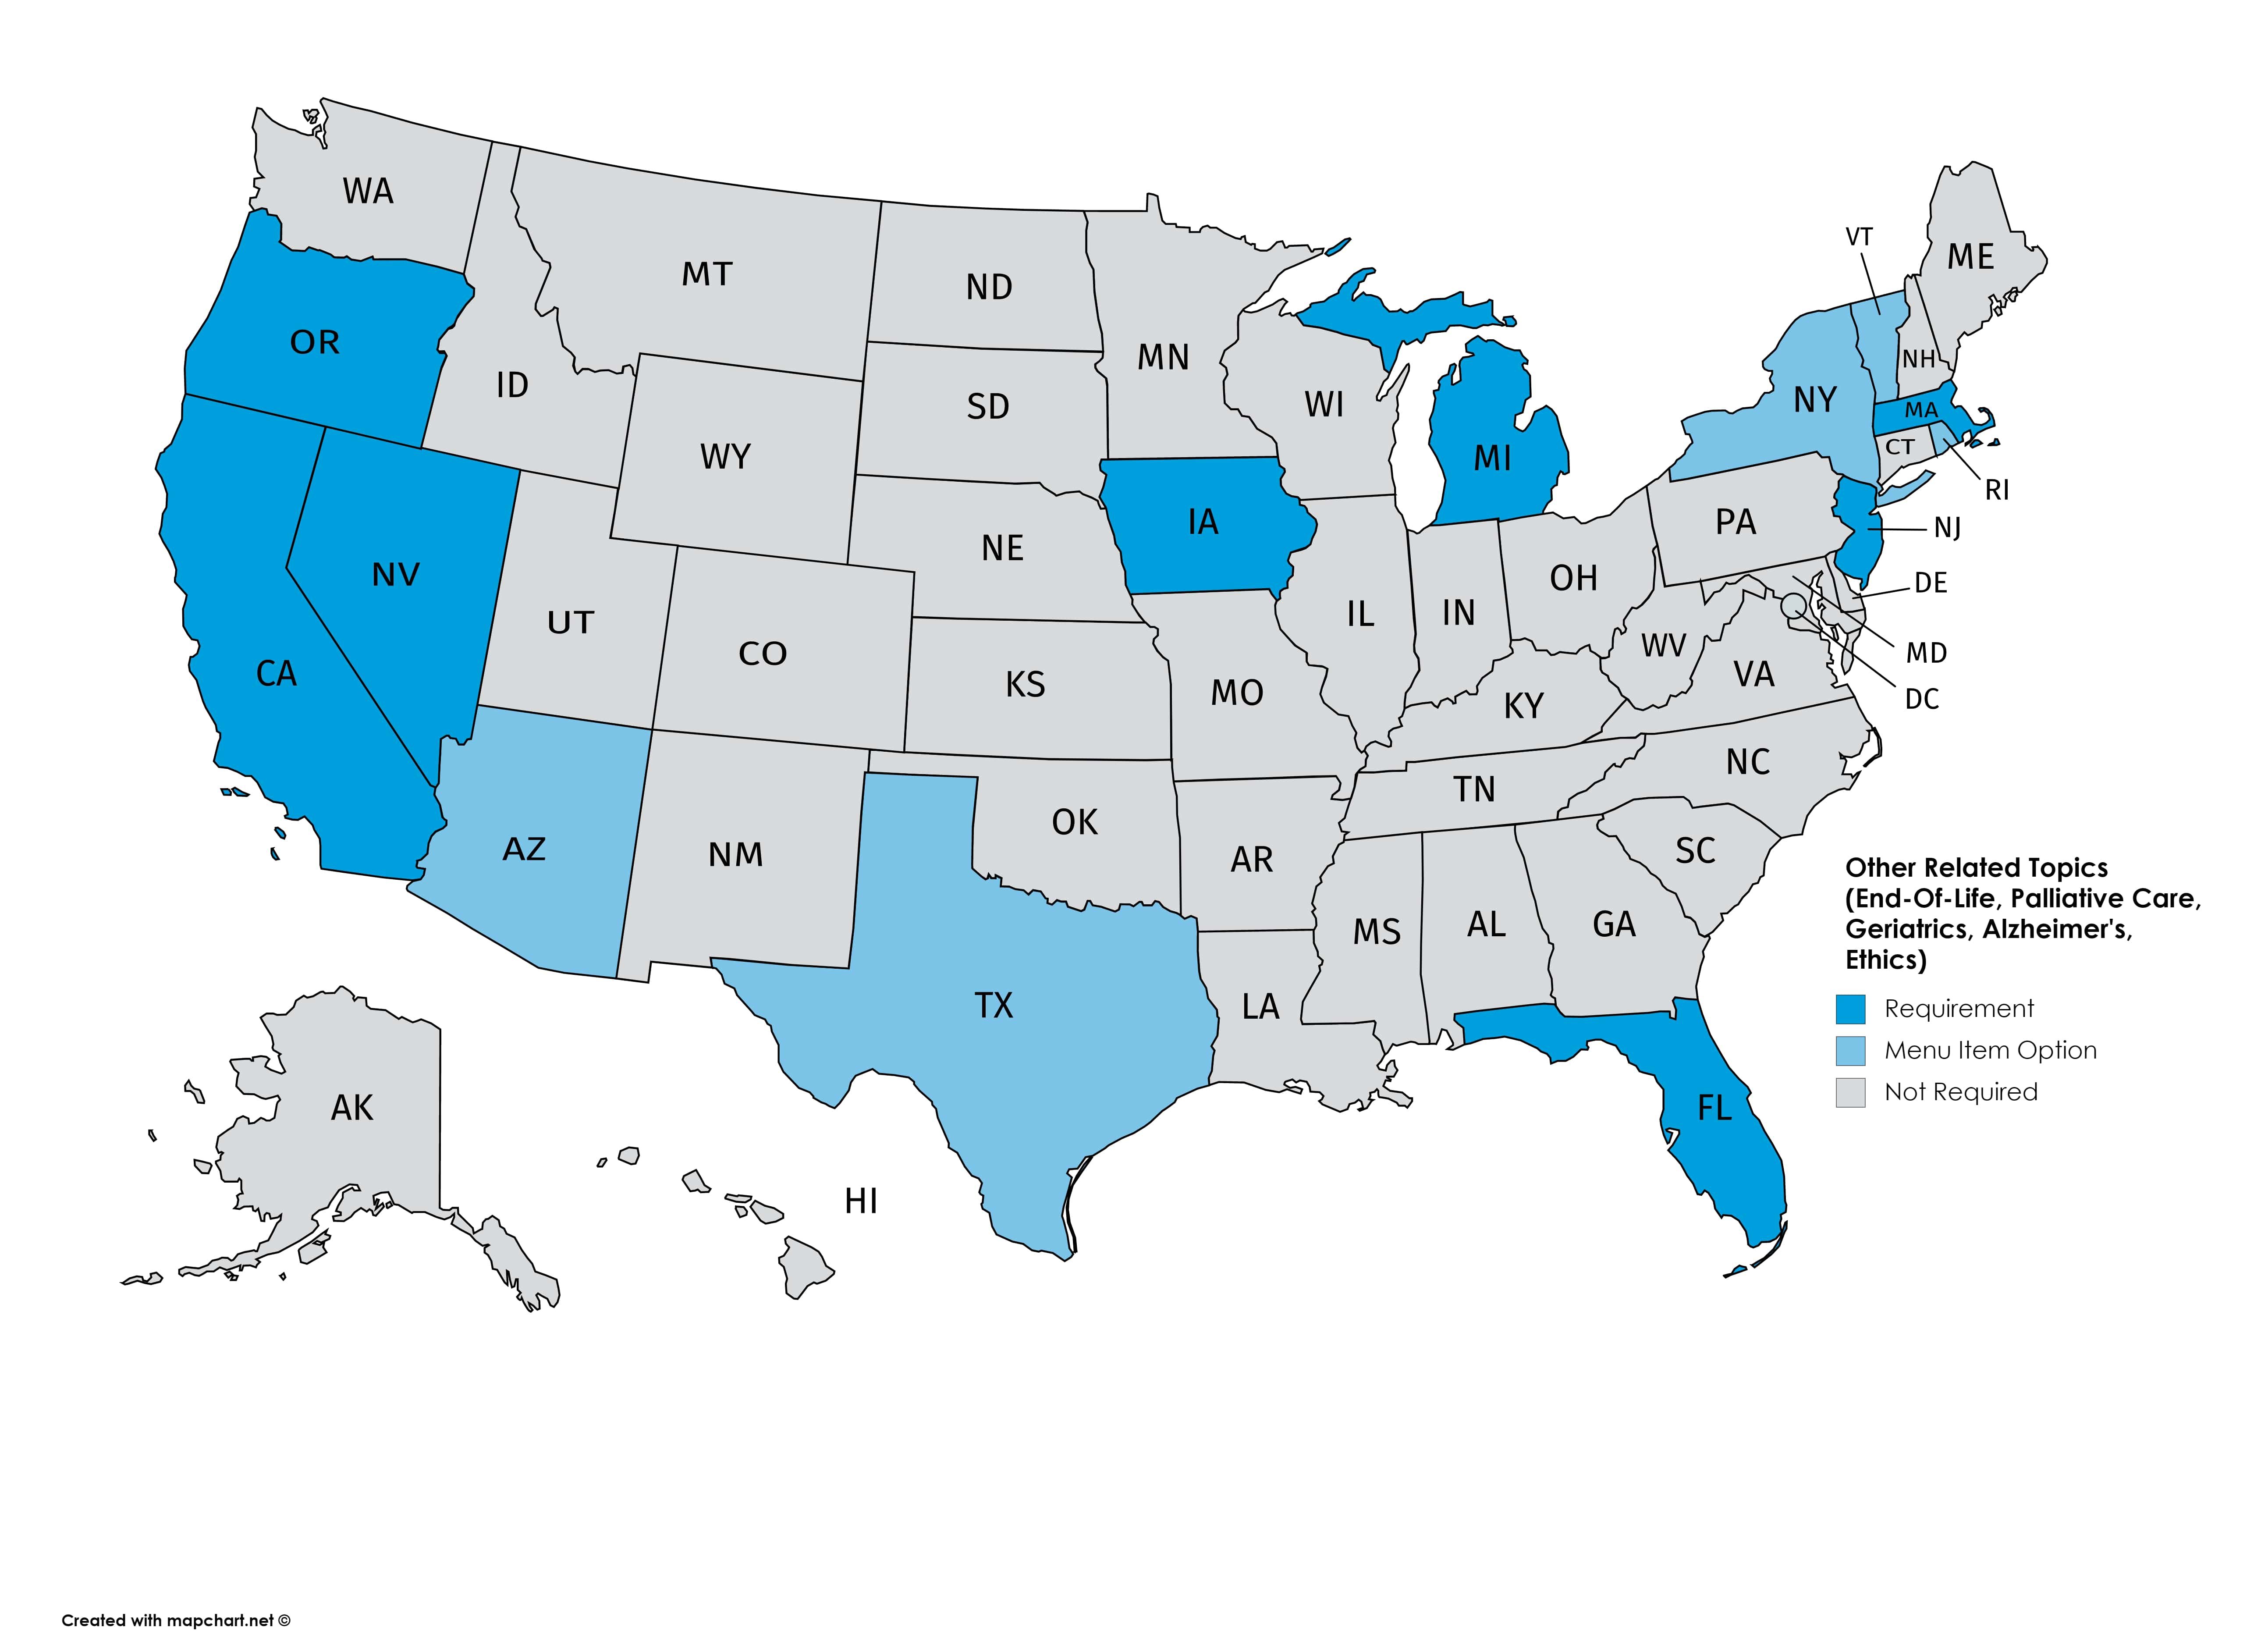 US Map Depicting Continuing Medical Education (CME) on Miscellaneous Topics, 2020